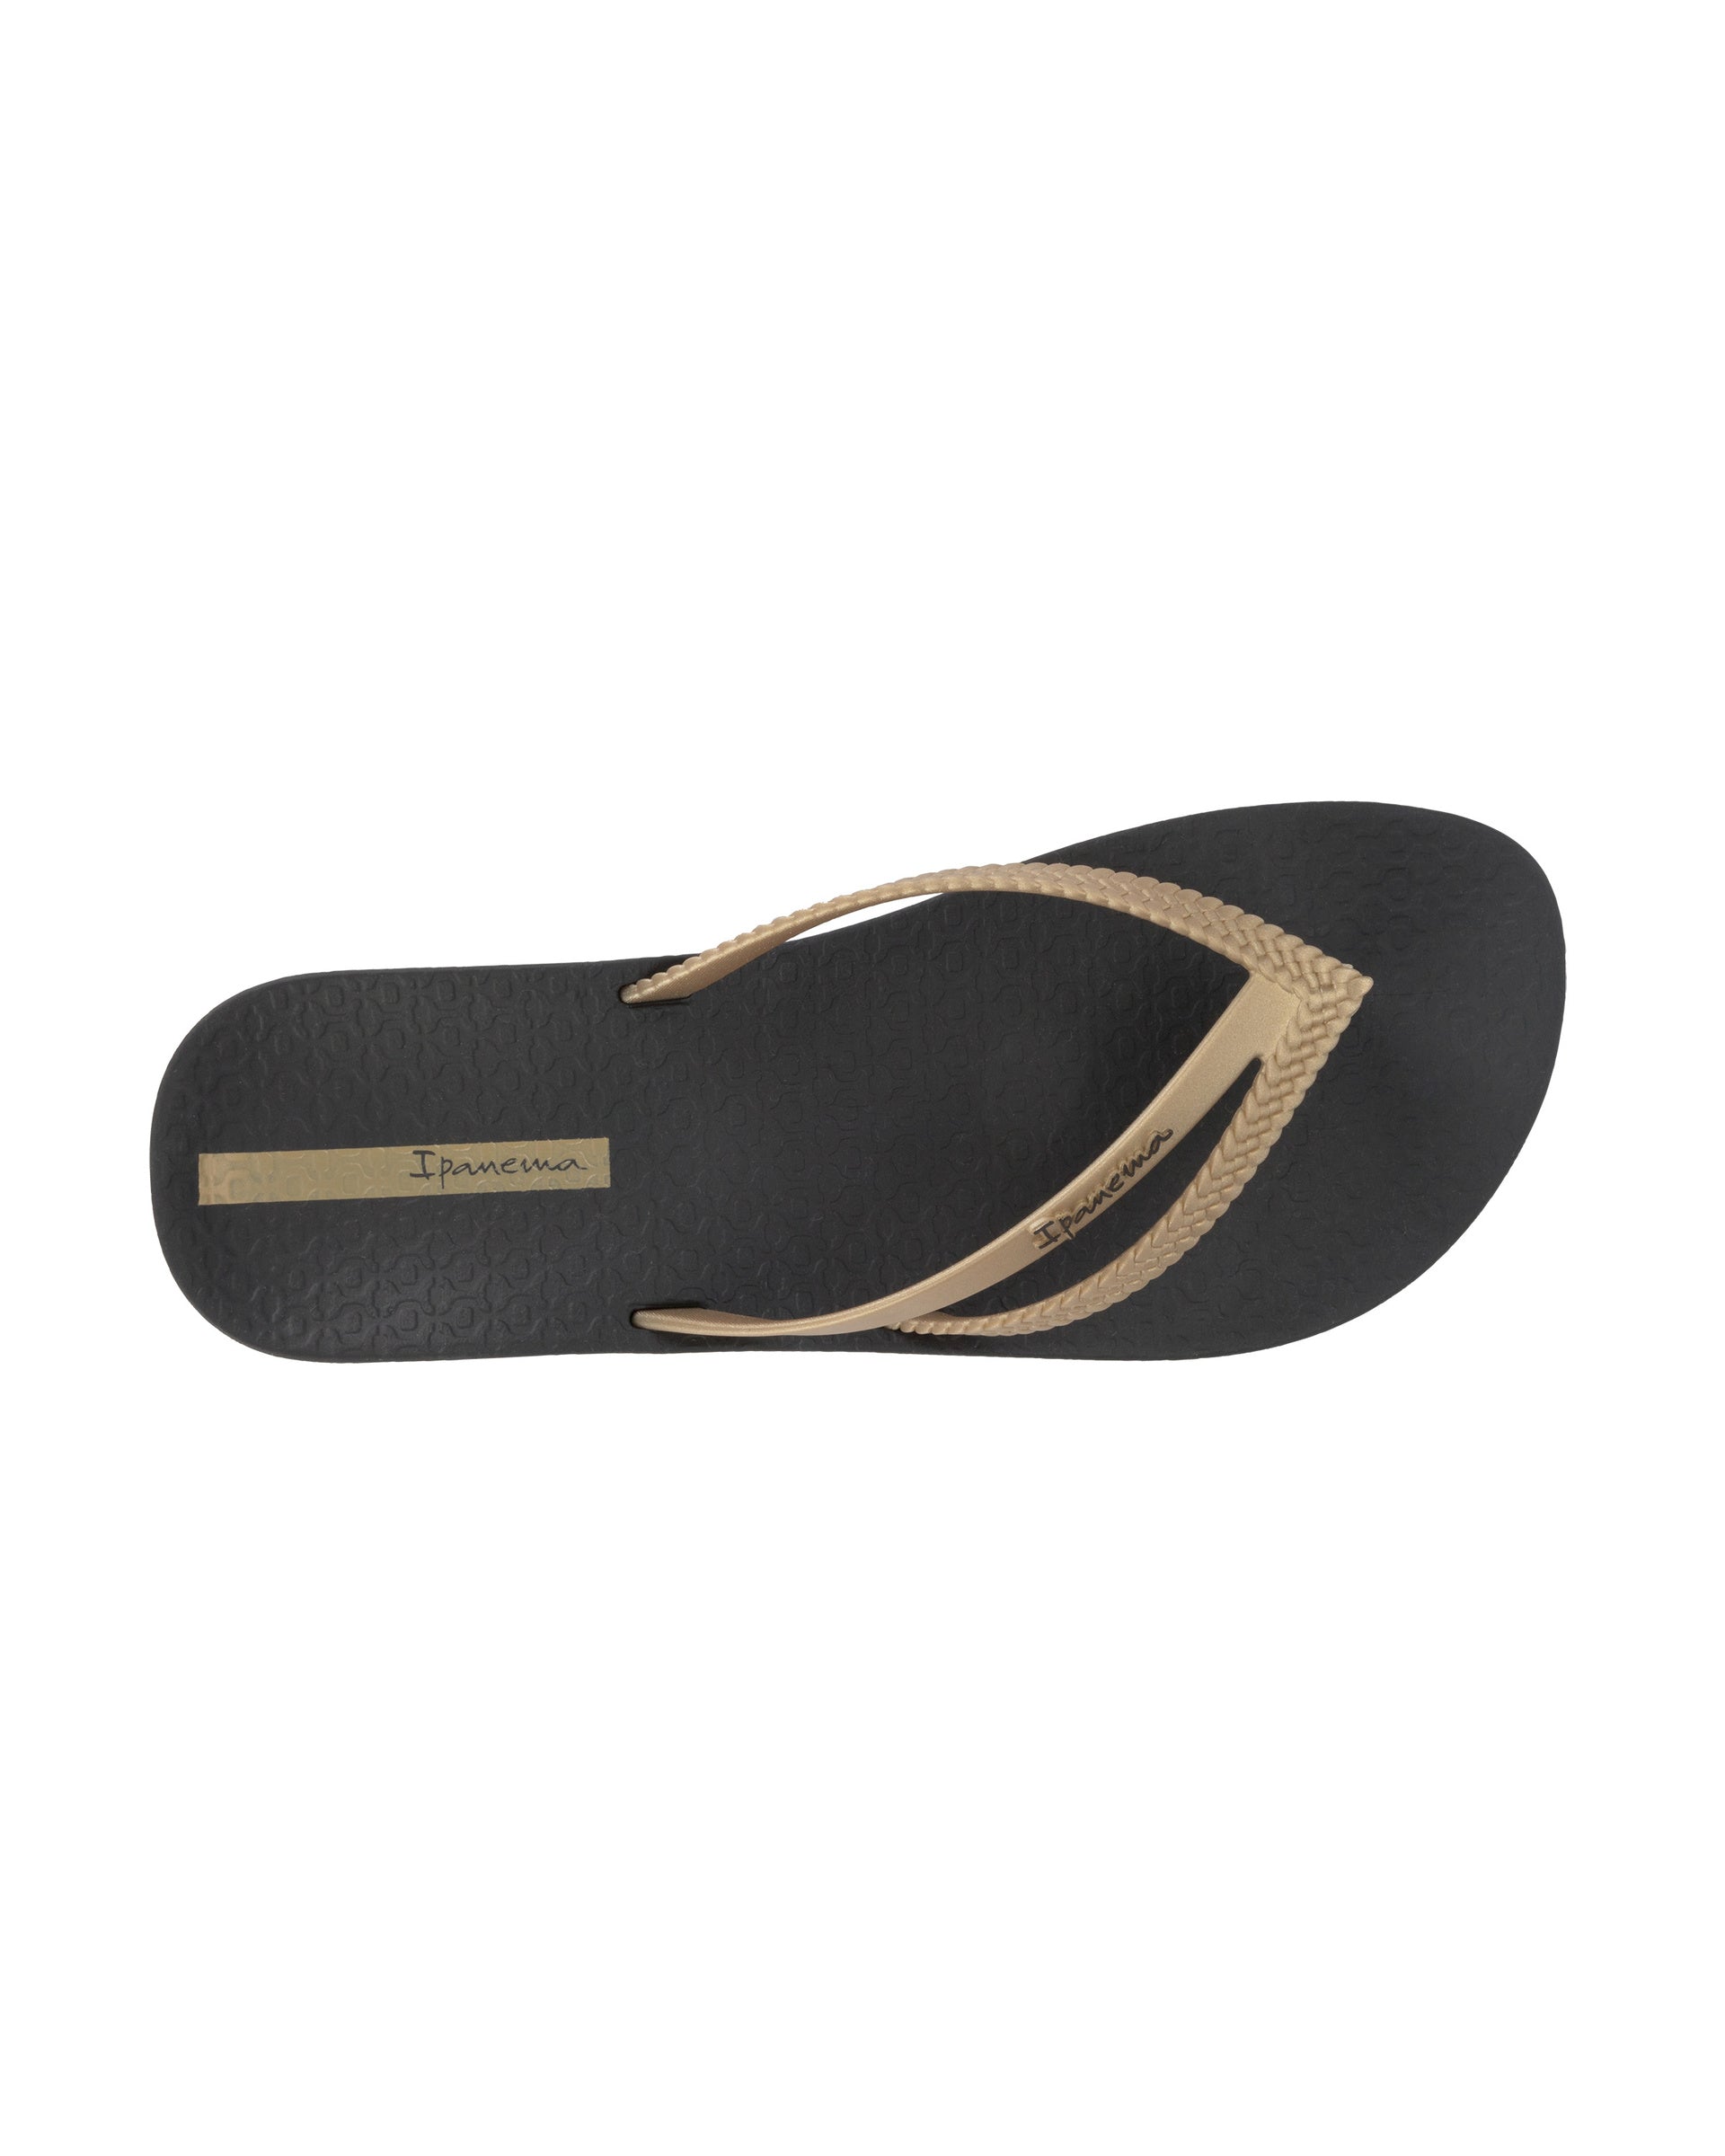 Top view of a black Ipanema Bossa Soft women's flip flop with metallic gold straps.